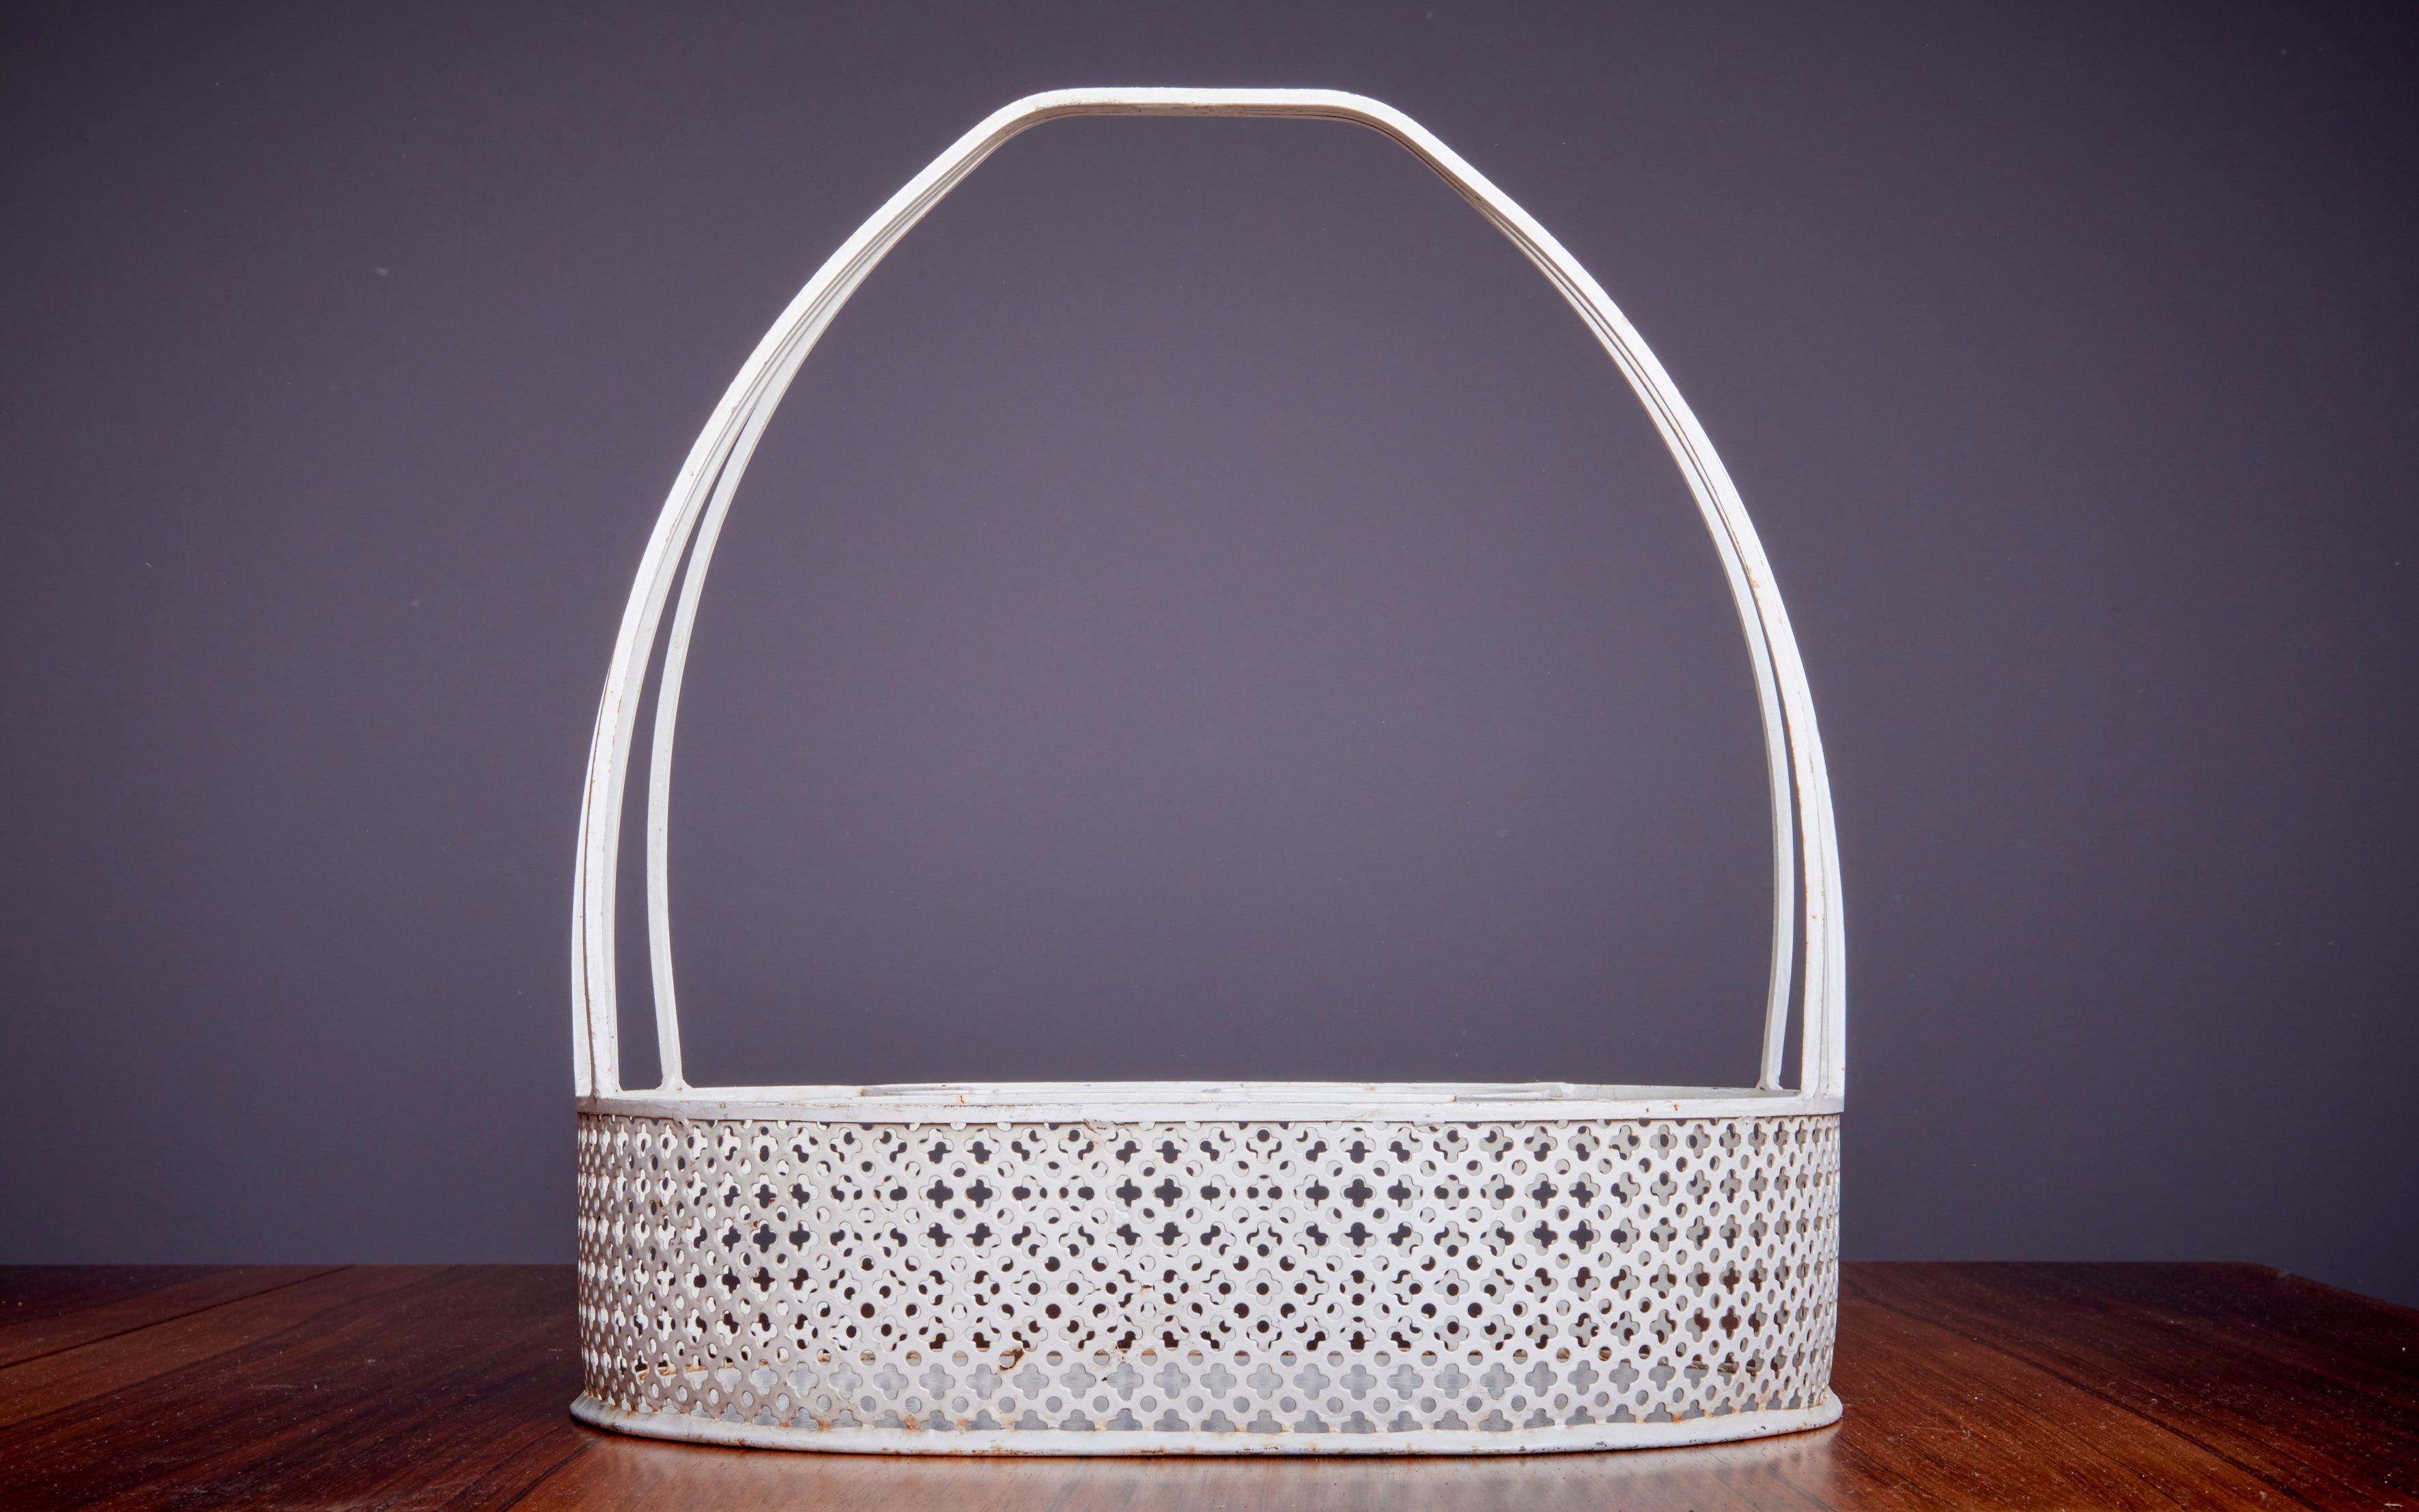 Classic and published Matégot bottle holder in white metal. Original vintage condition.

Mathieu Matégot (1910-2001) was a Hungarian-born French designer and artist. He is known for his innovative use of metal tubing and perforated metal sheets,